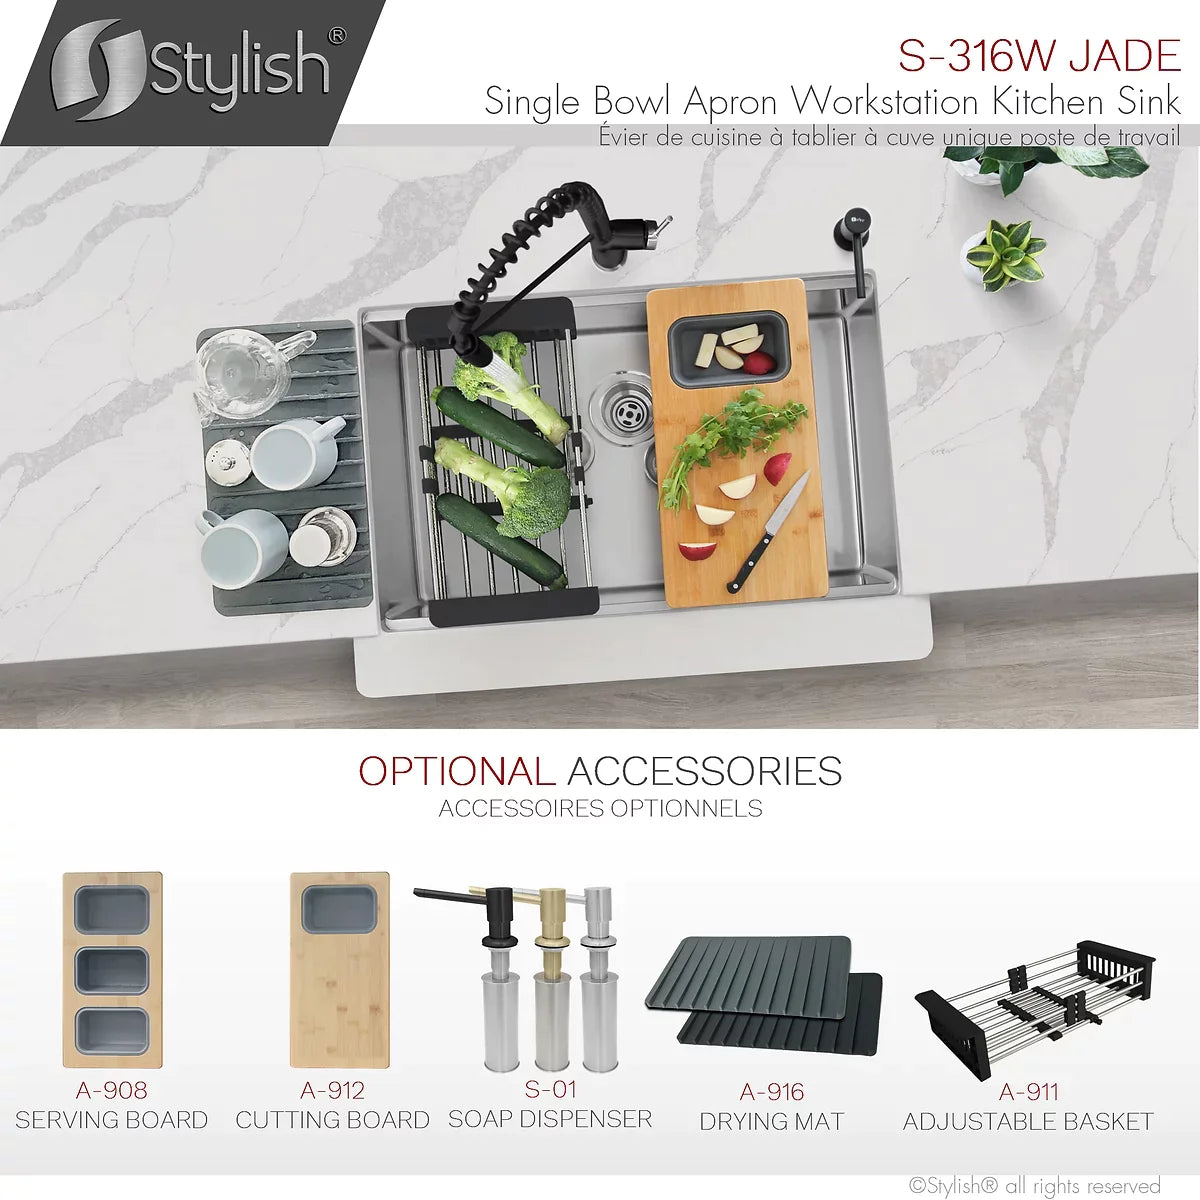 Stylish Jade 30" x 22" Farmhouse Workstation Single Bowl Stainless Steel Apron Kitchen Sink with Built-in Accessories S-316W